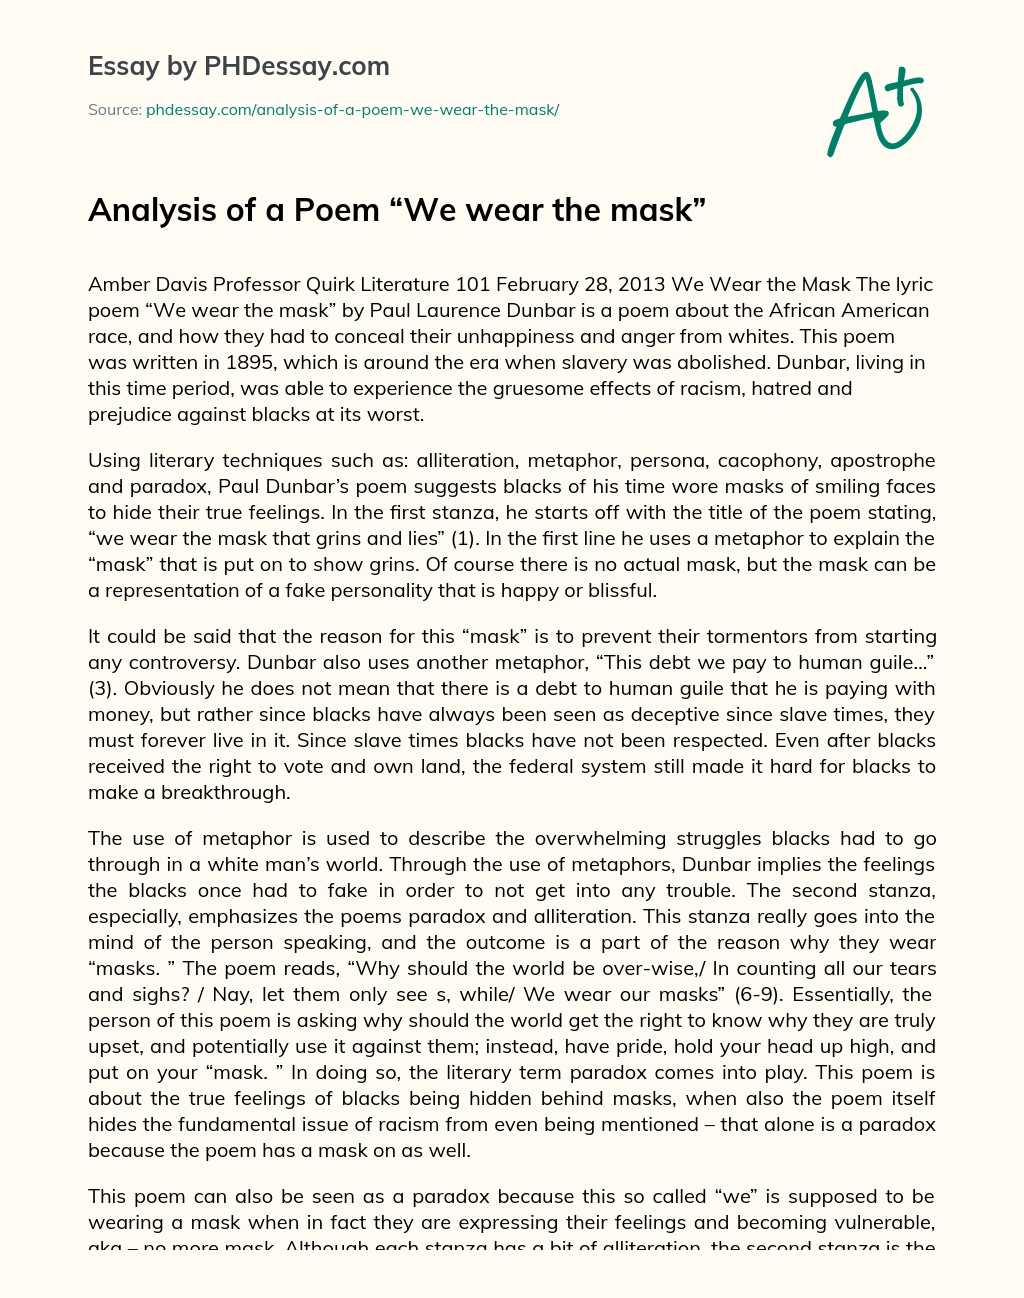 Analysis of a Poem “We wear the mask” essay